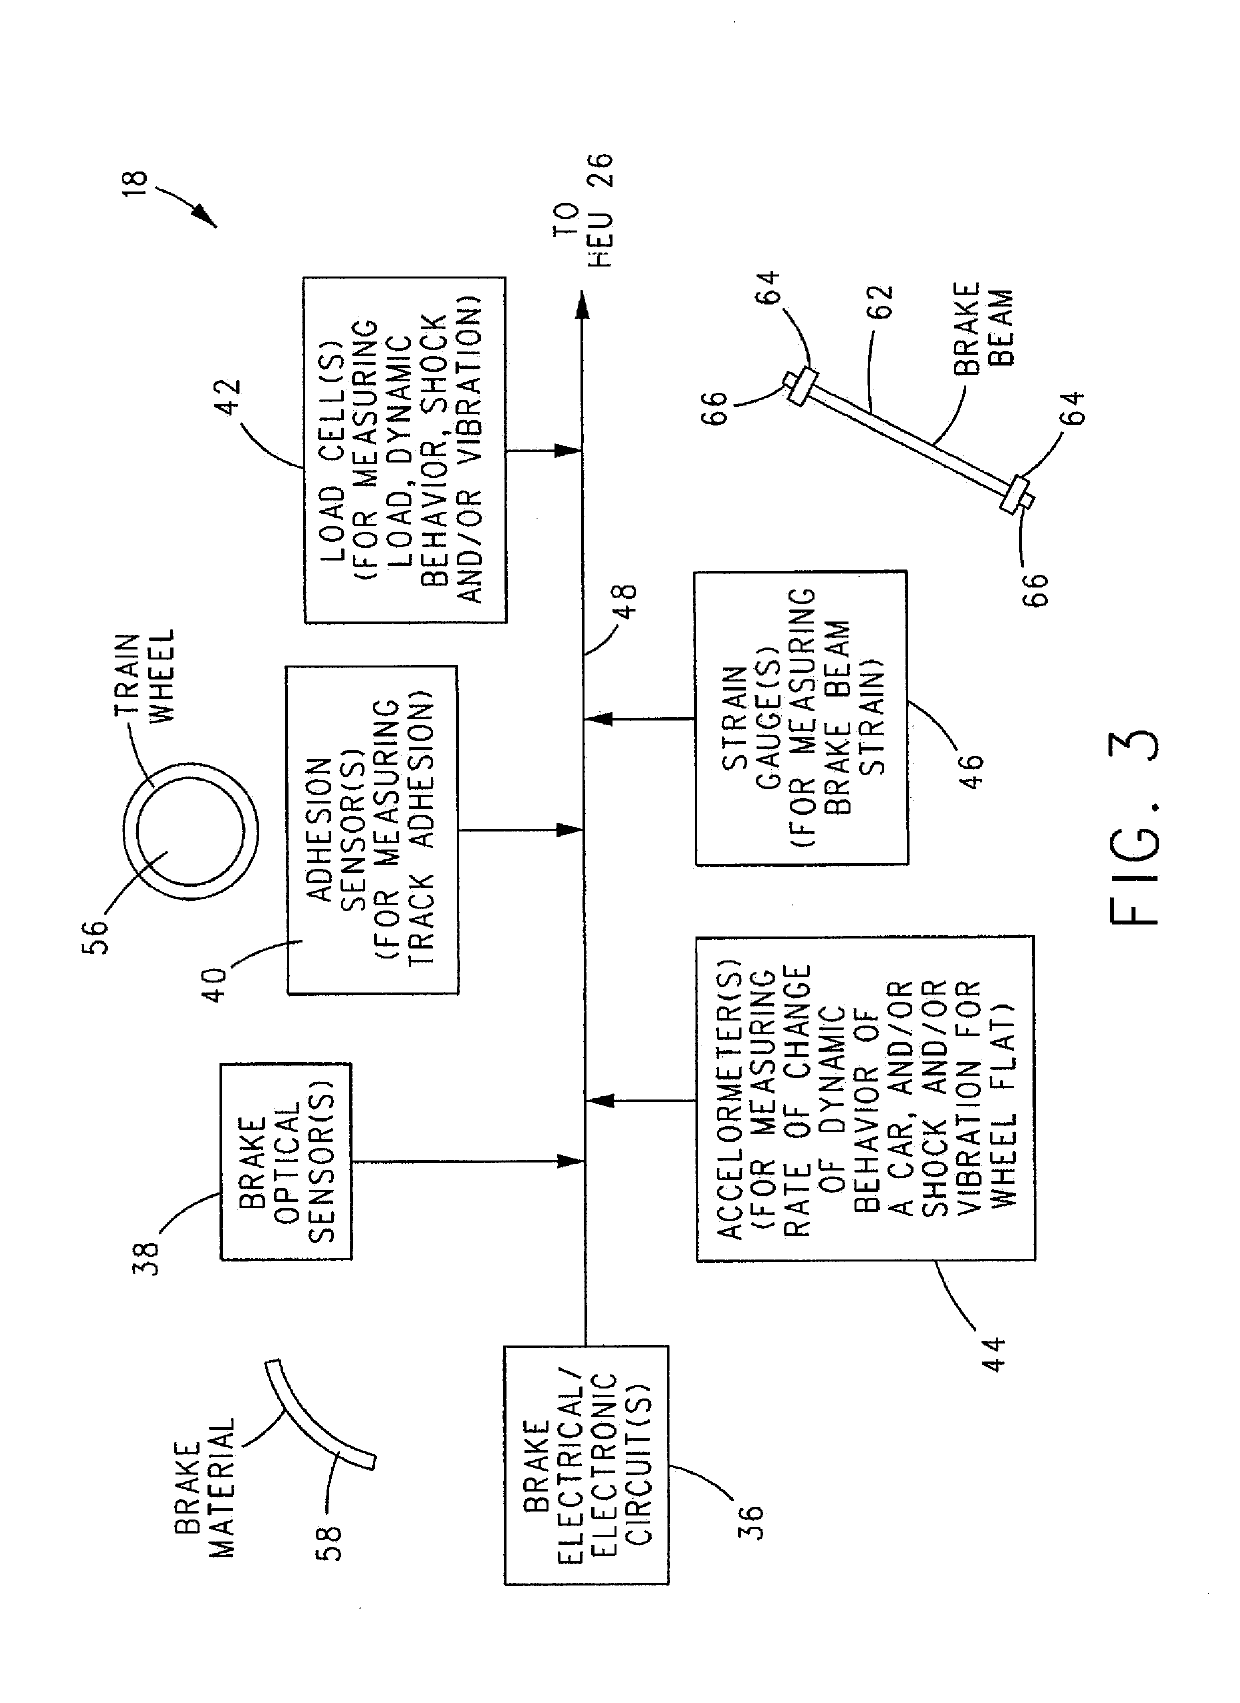 System and Method for Adaptive Braking